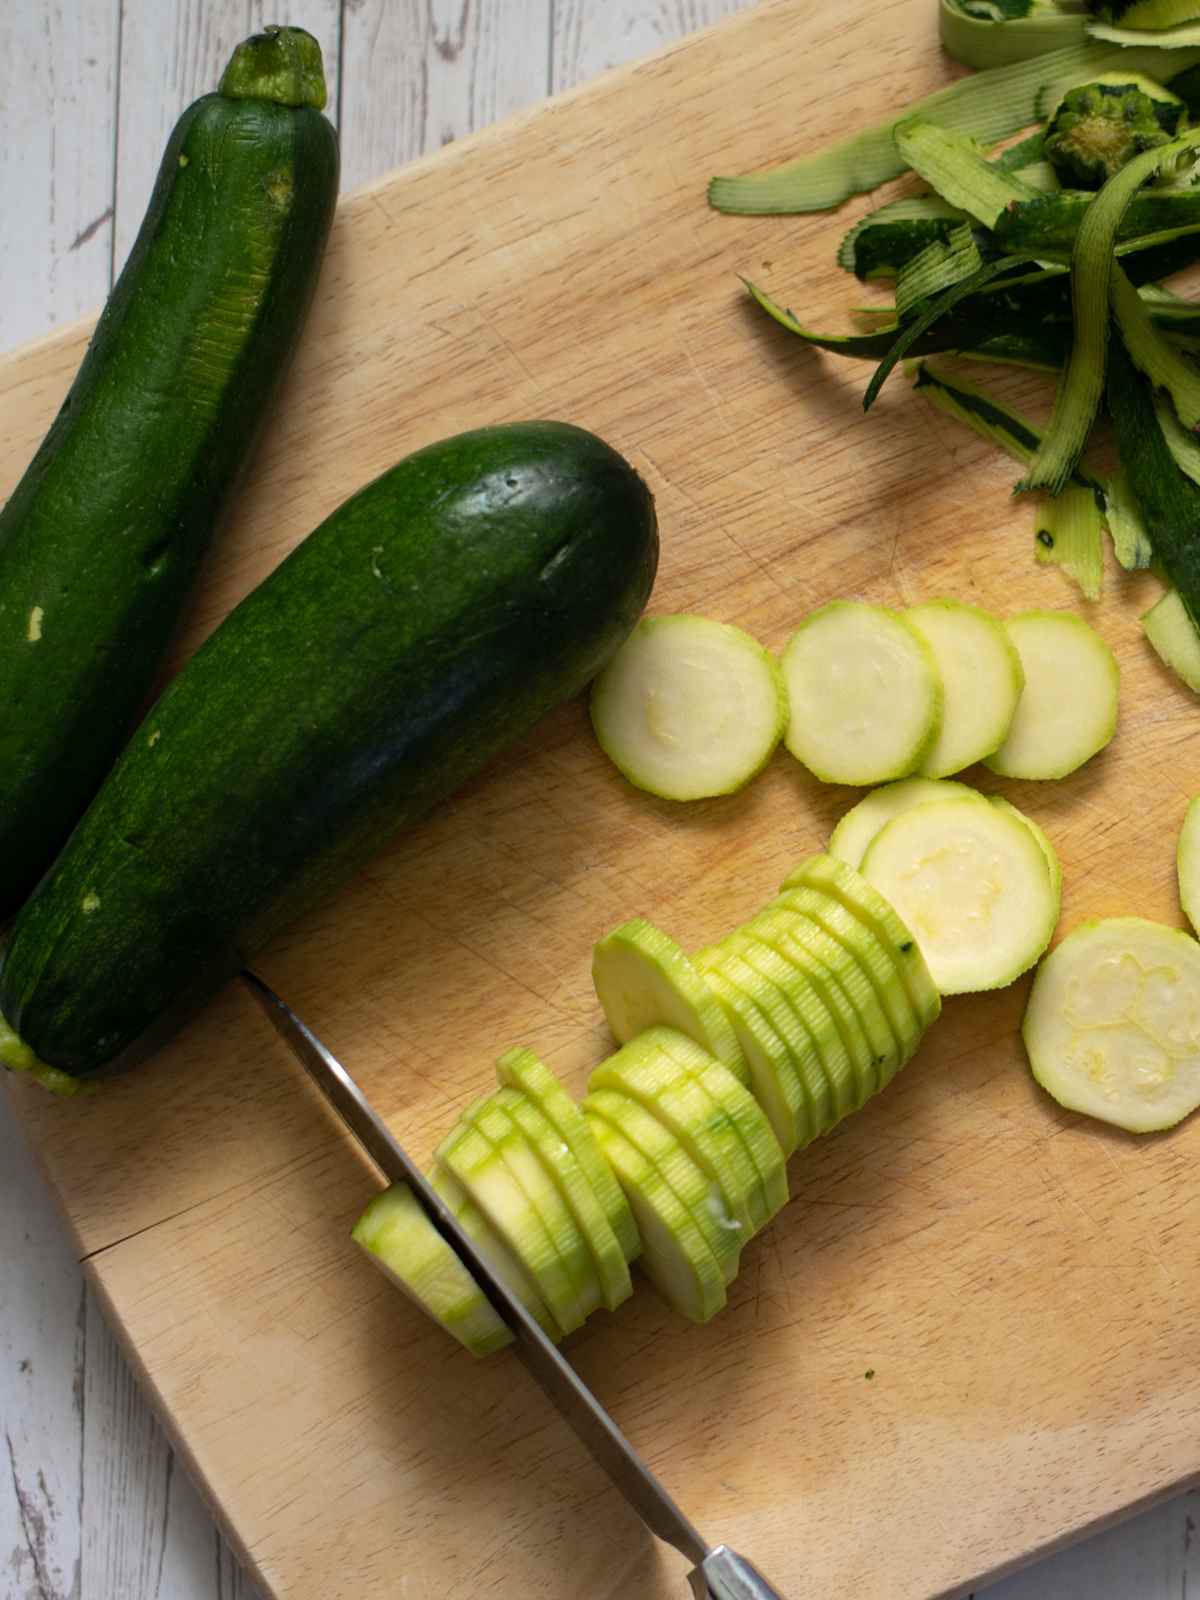 Is Zucchini Good for You